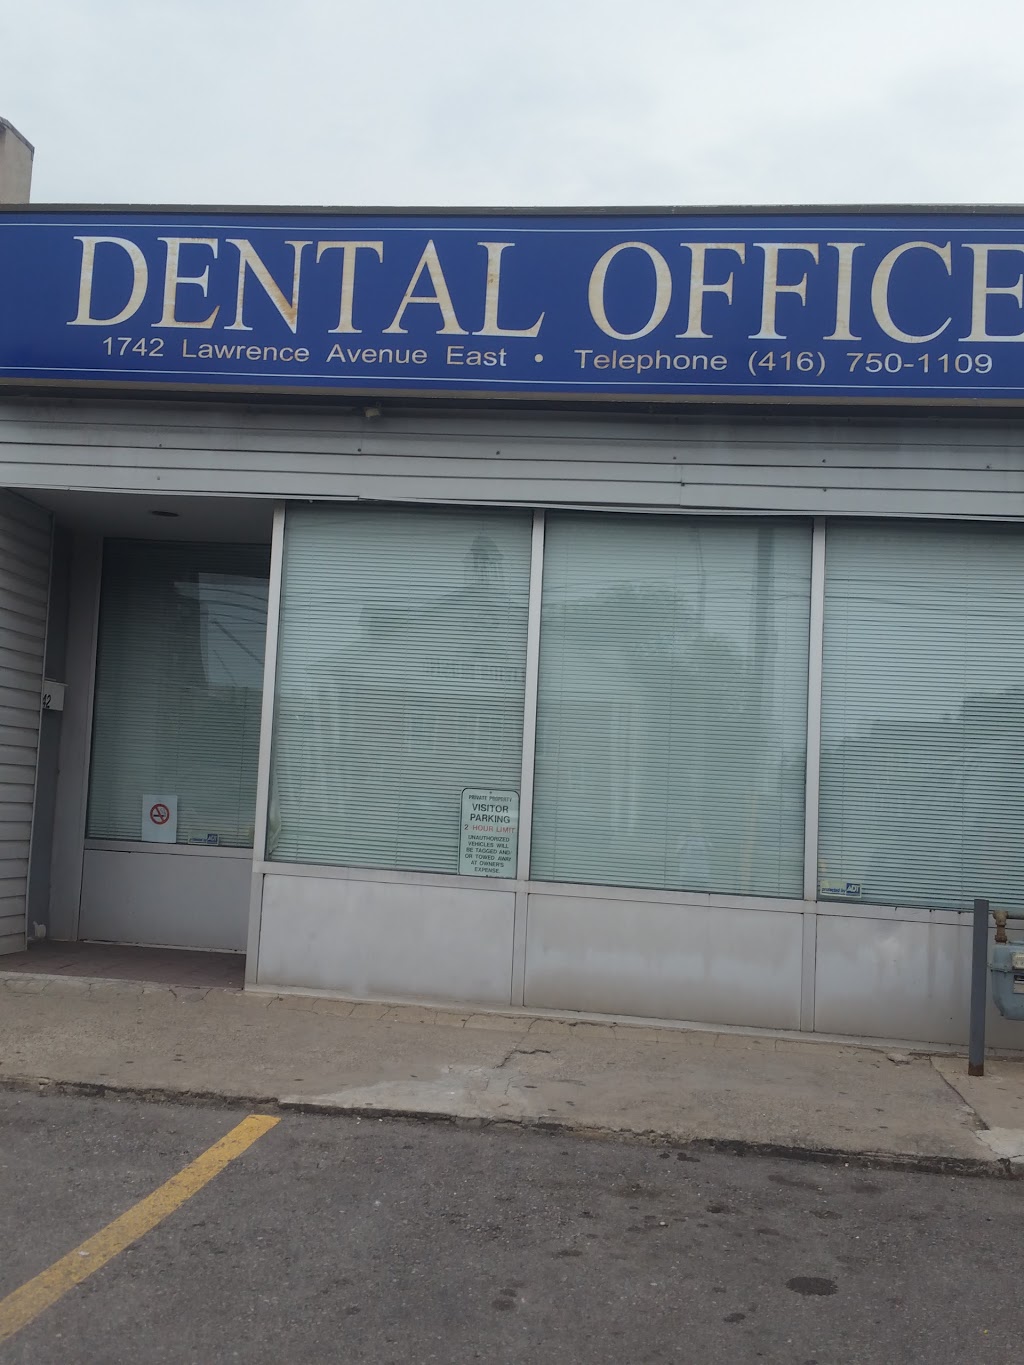 DENTAL OFFICE 1742 Lawrence avenue East | 1746 Lawrence Ave E, Scarborough, ON M1R 2Y1, Canada | Phone: (416) 750-1109